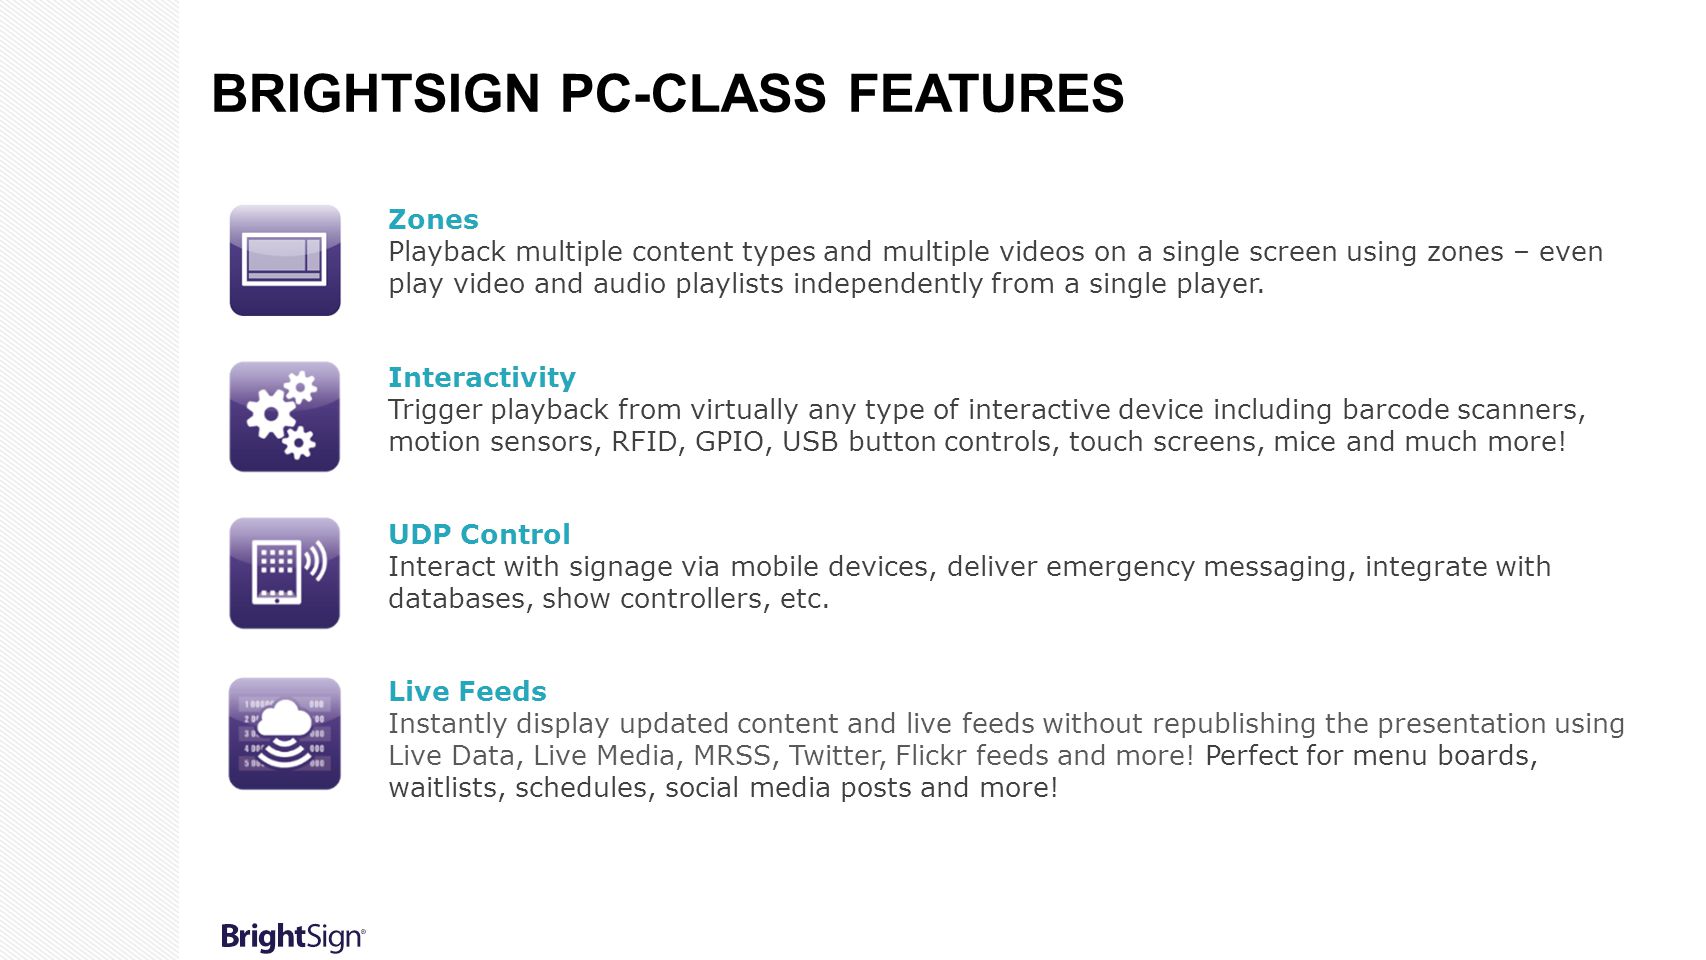 BrightSign PC-Class Features